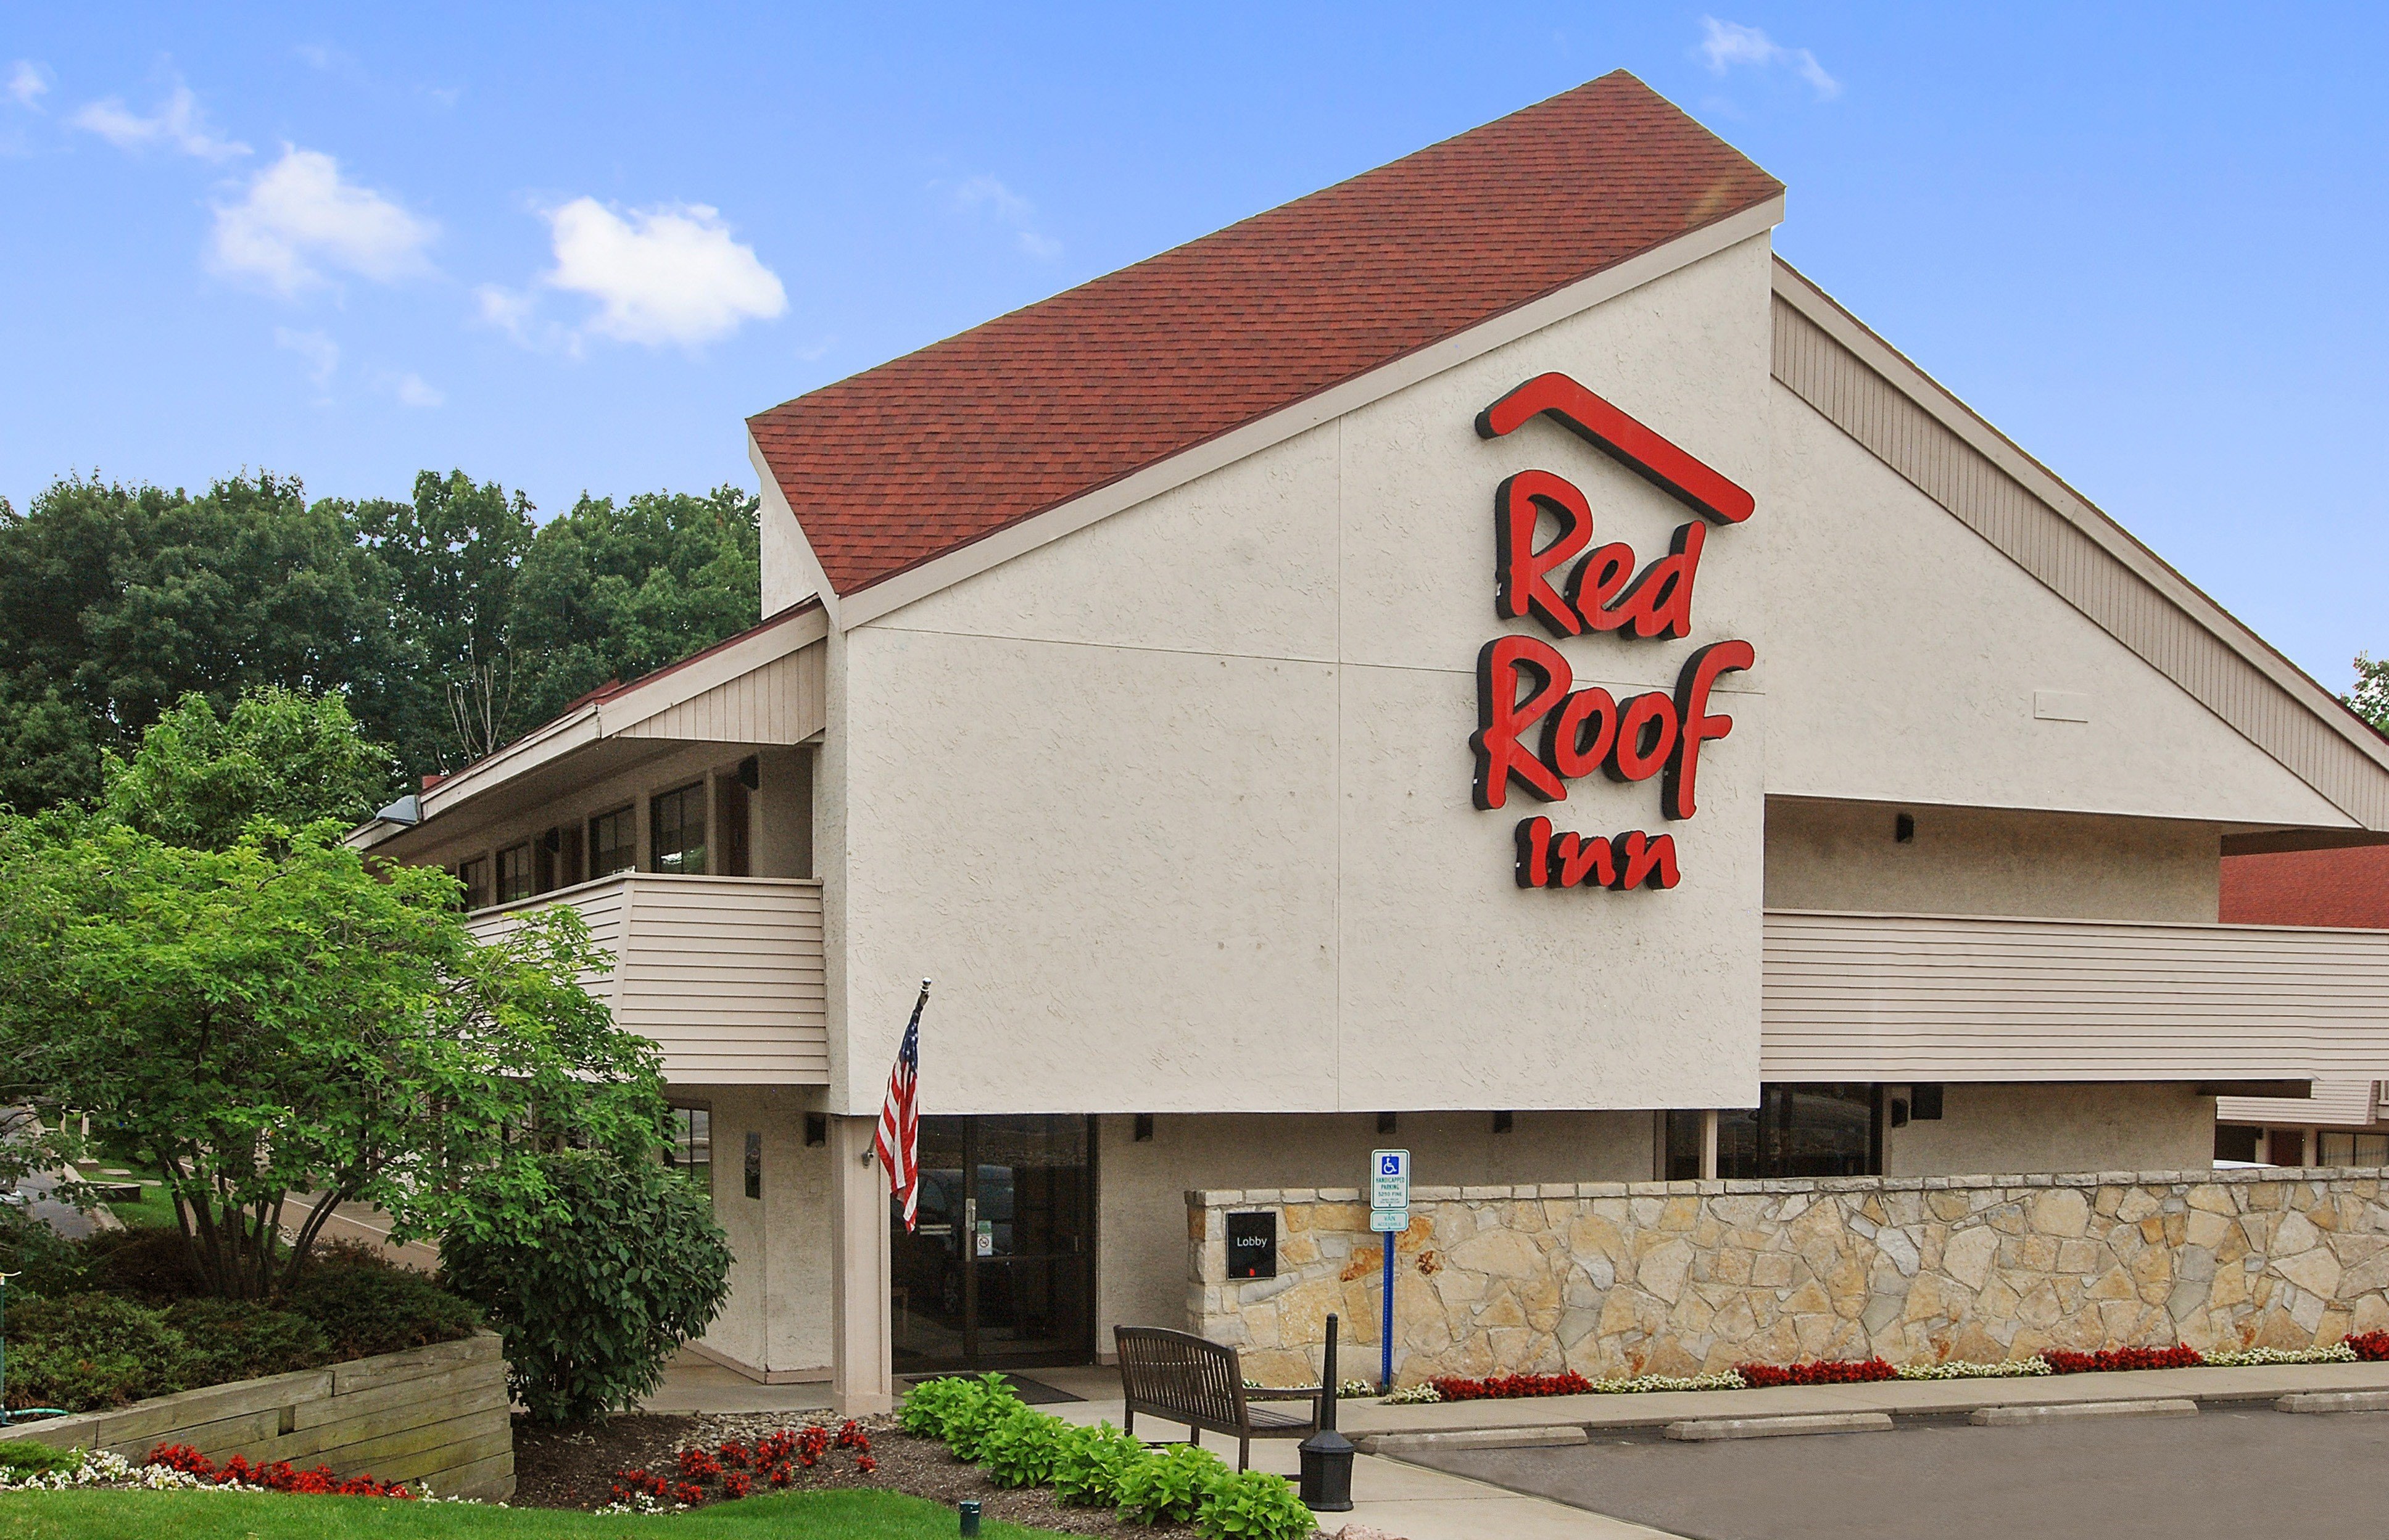 Photo of Red Roof Inn Cleveland East - Willoughby, Willoughby, OH